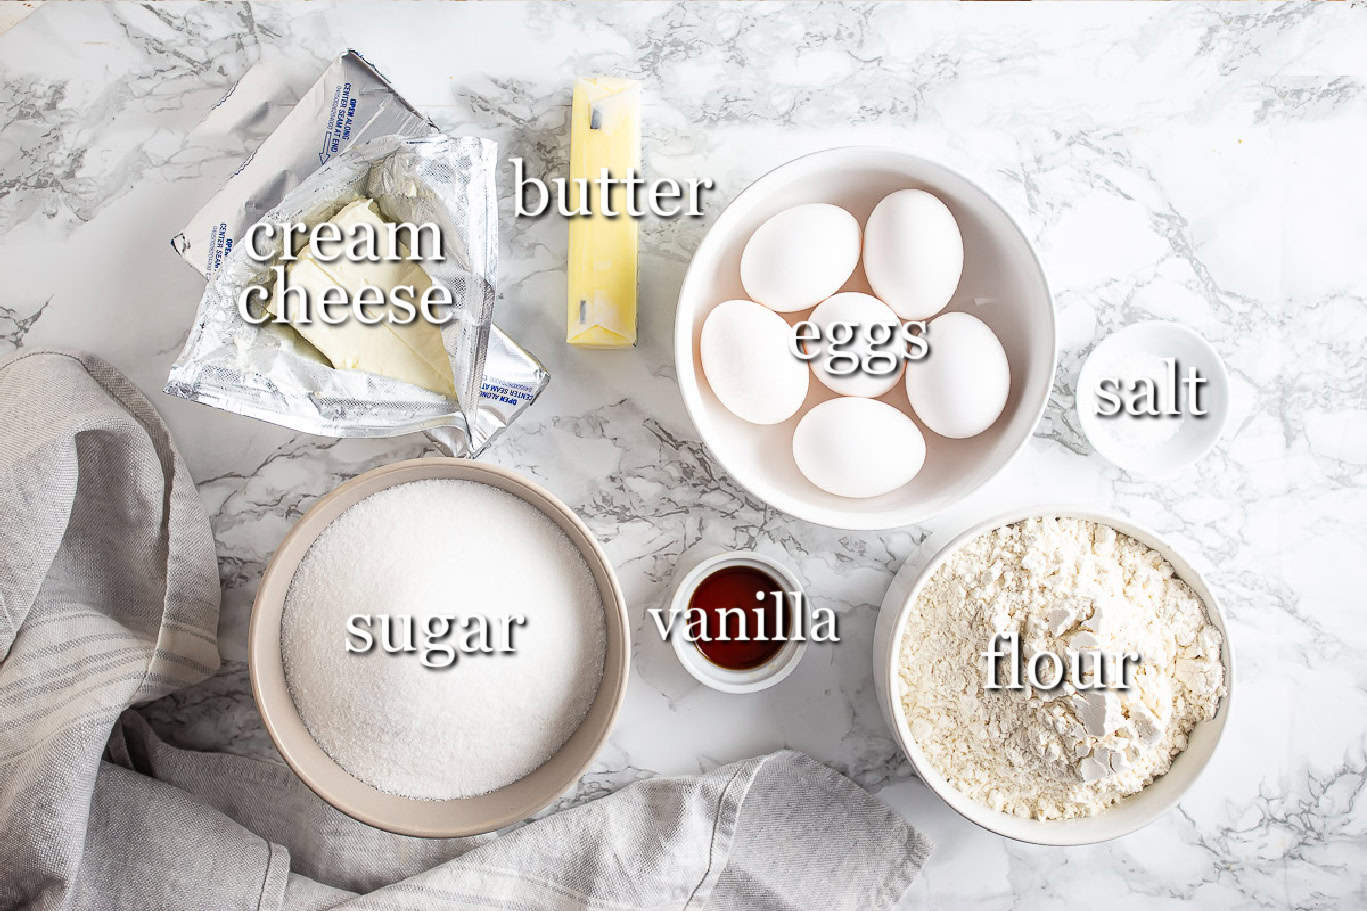 Ingredients for making cream cheese pound cake, with text labels.